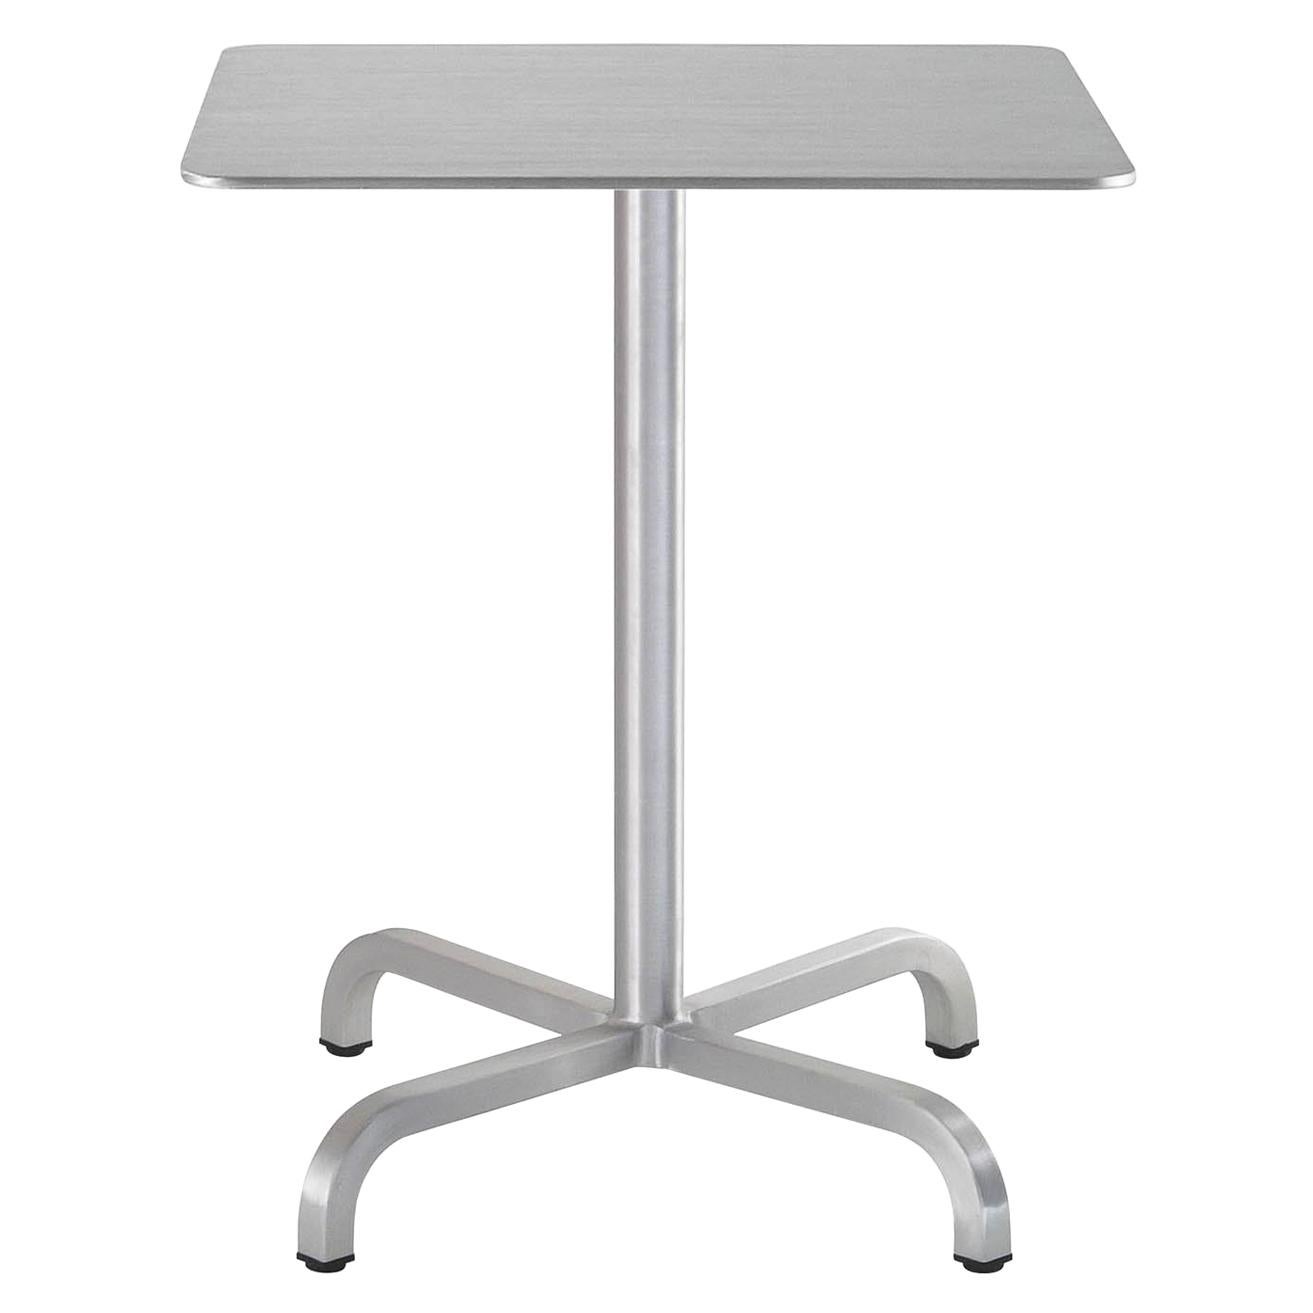 Emeco 20-06 Small Square Café Table in Brushed Aluminum by Norman Foster For Sale